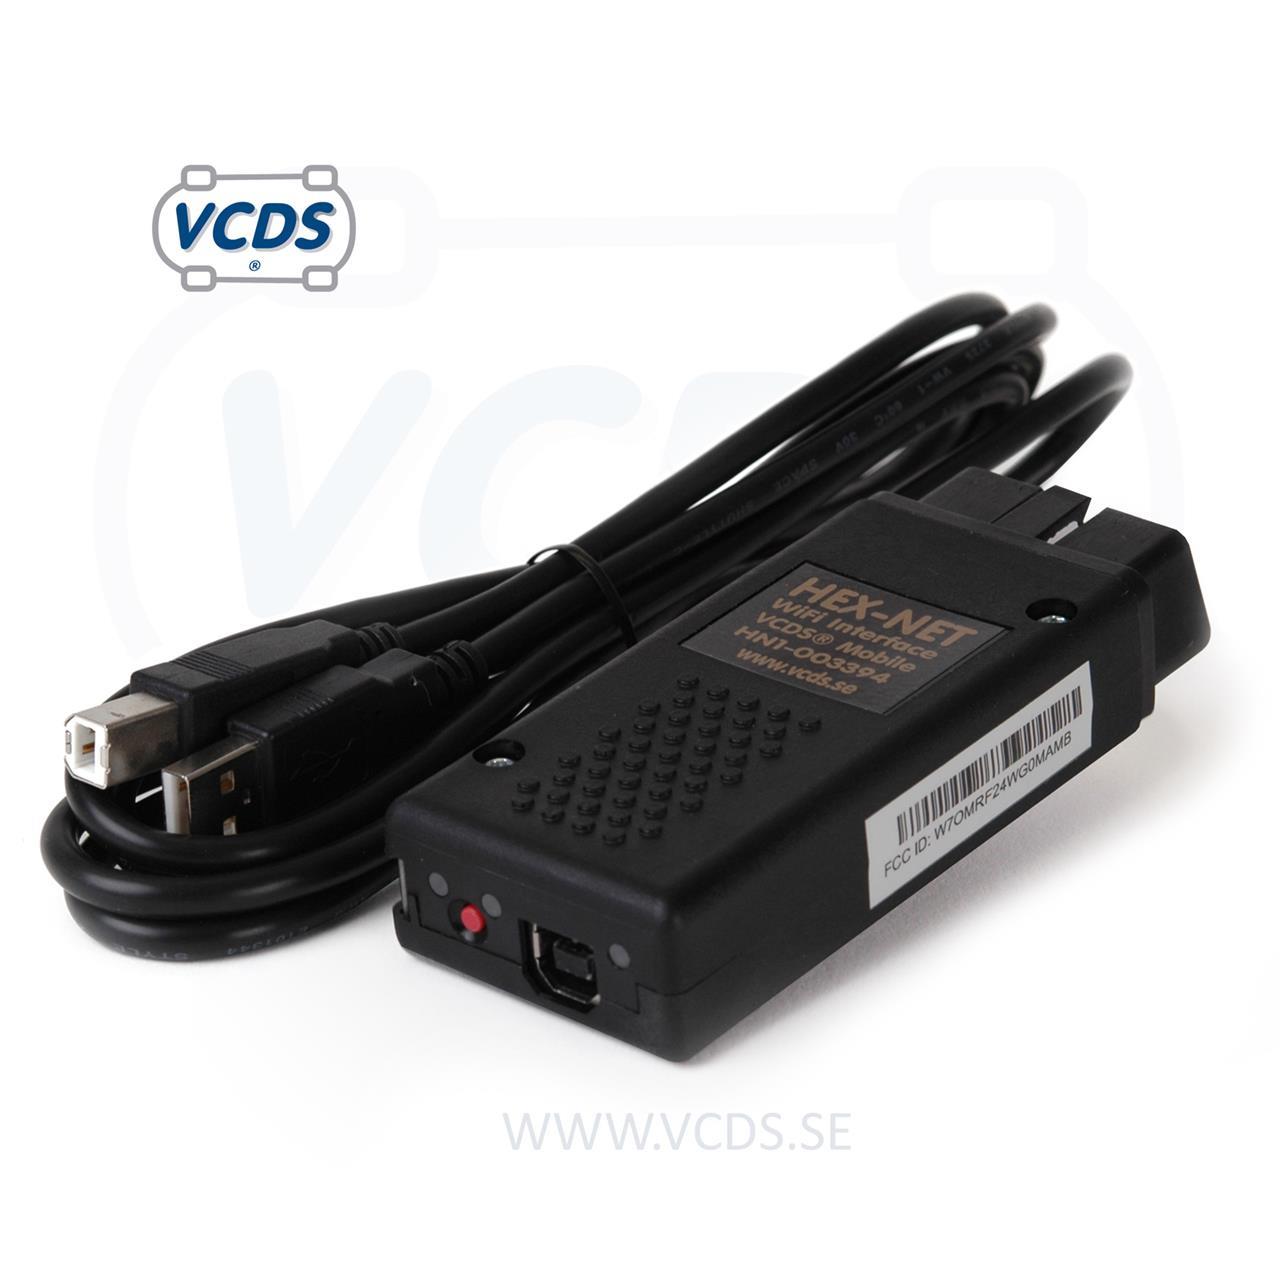 HEX-NET + VCDS and VCDS-Mobile + walizka